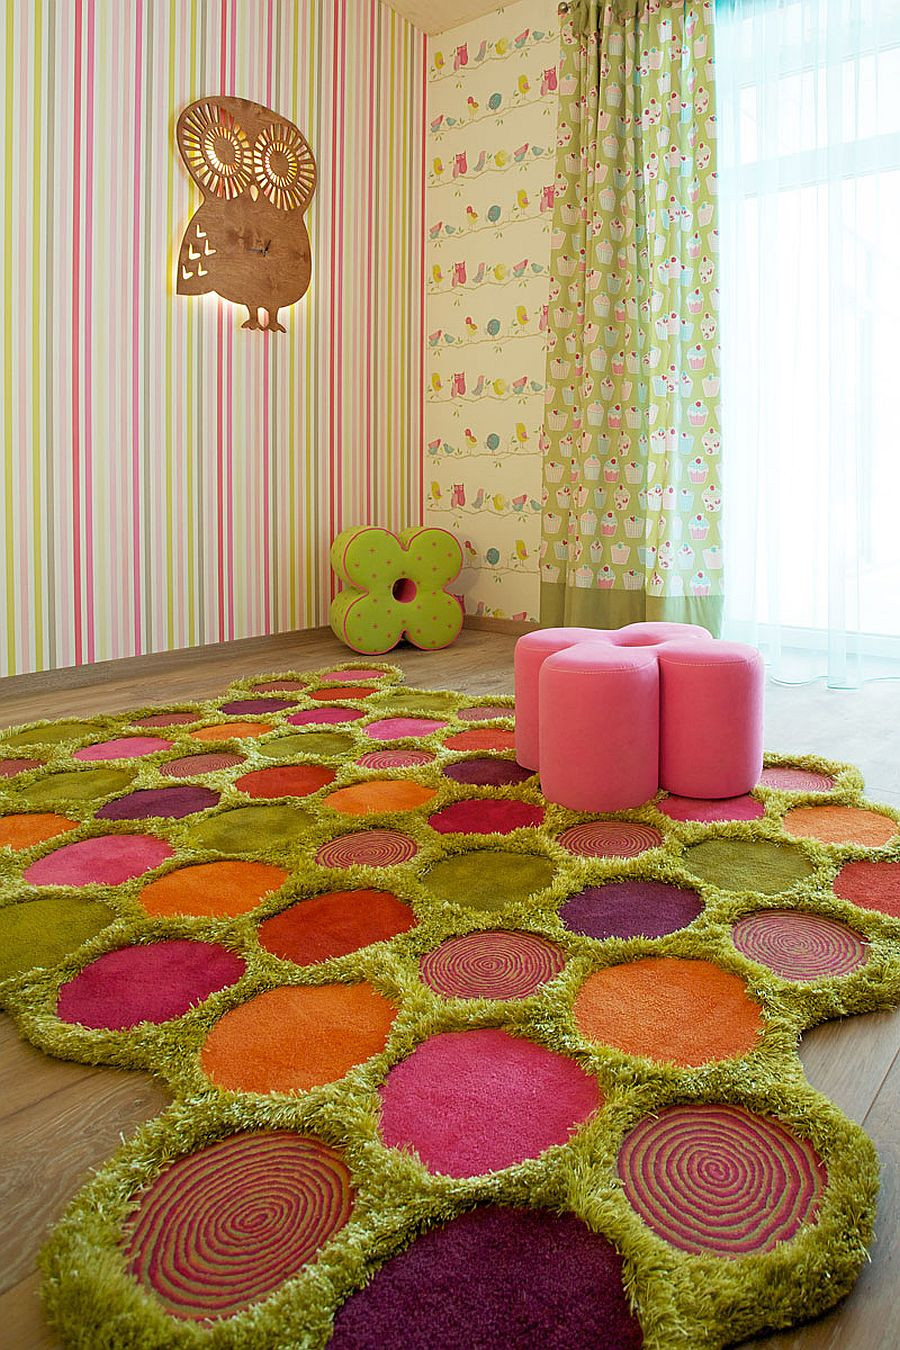 Kids Room Rug
 Colorful Zest 25 Eye Catching Rug Ideas for Kids’ Rooms